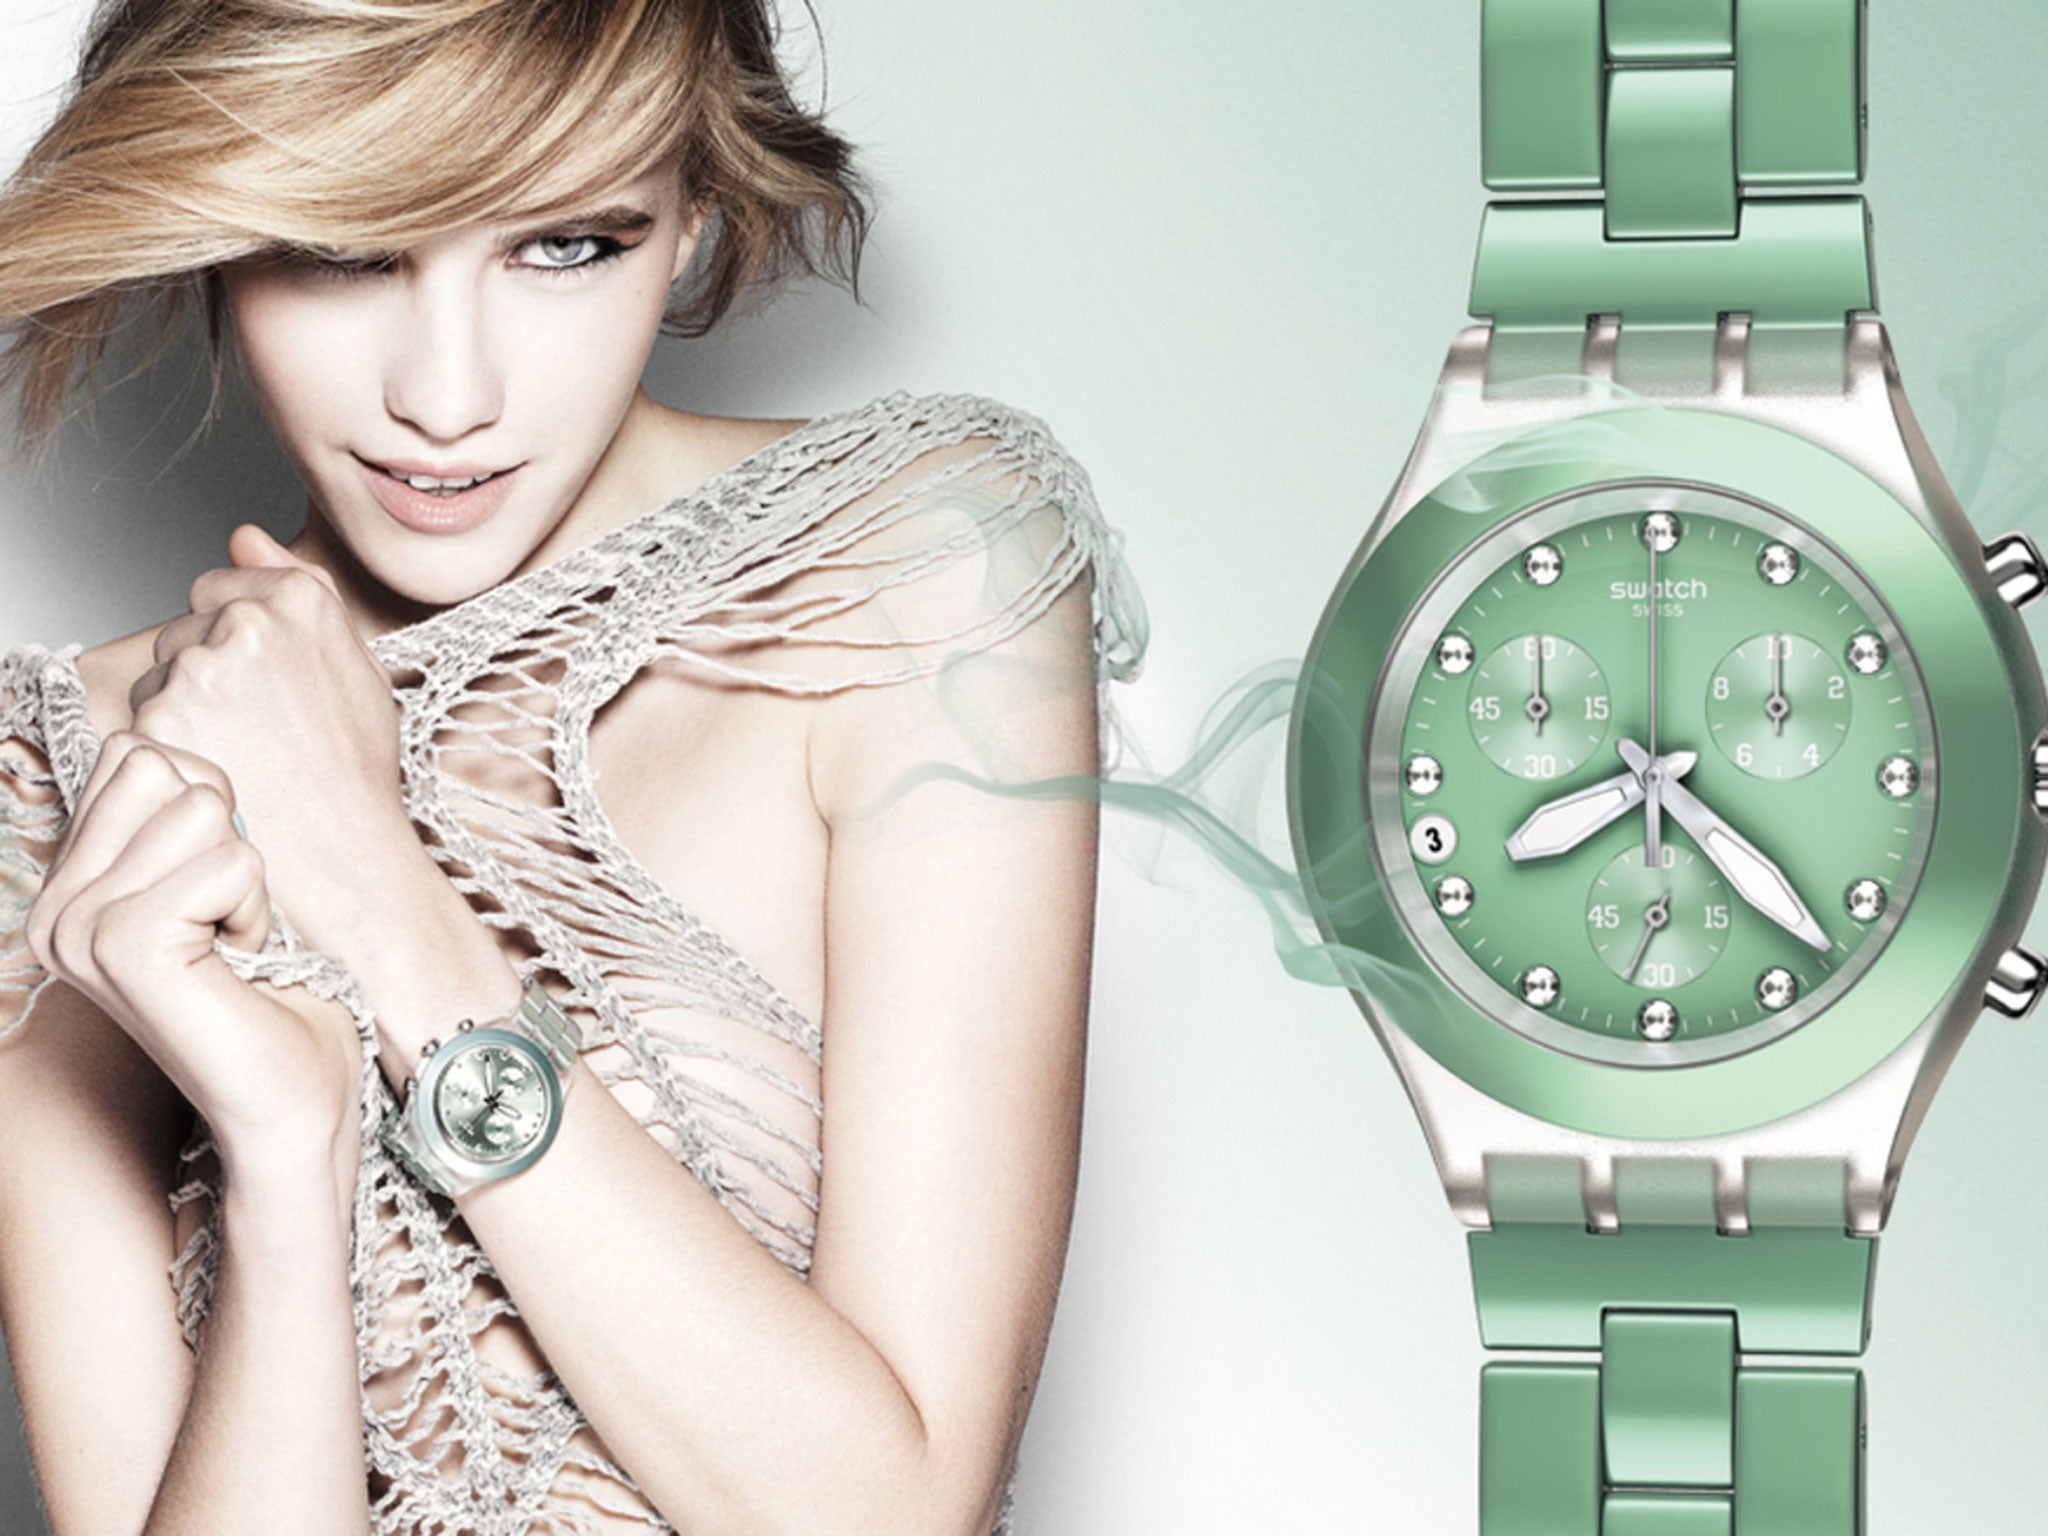 A model poses for the Swatch match campaign